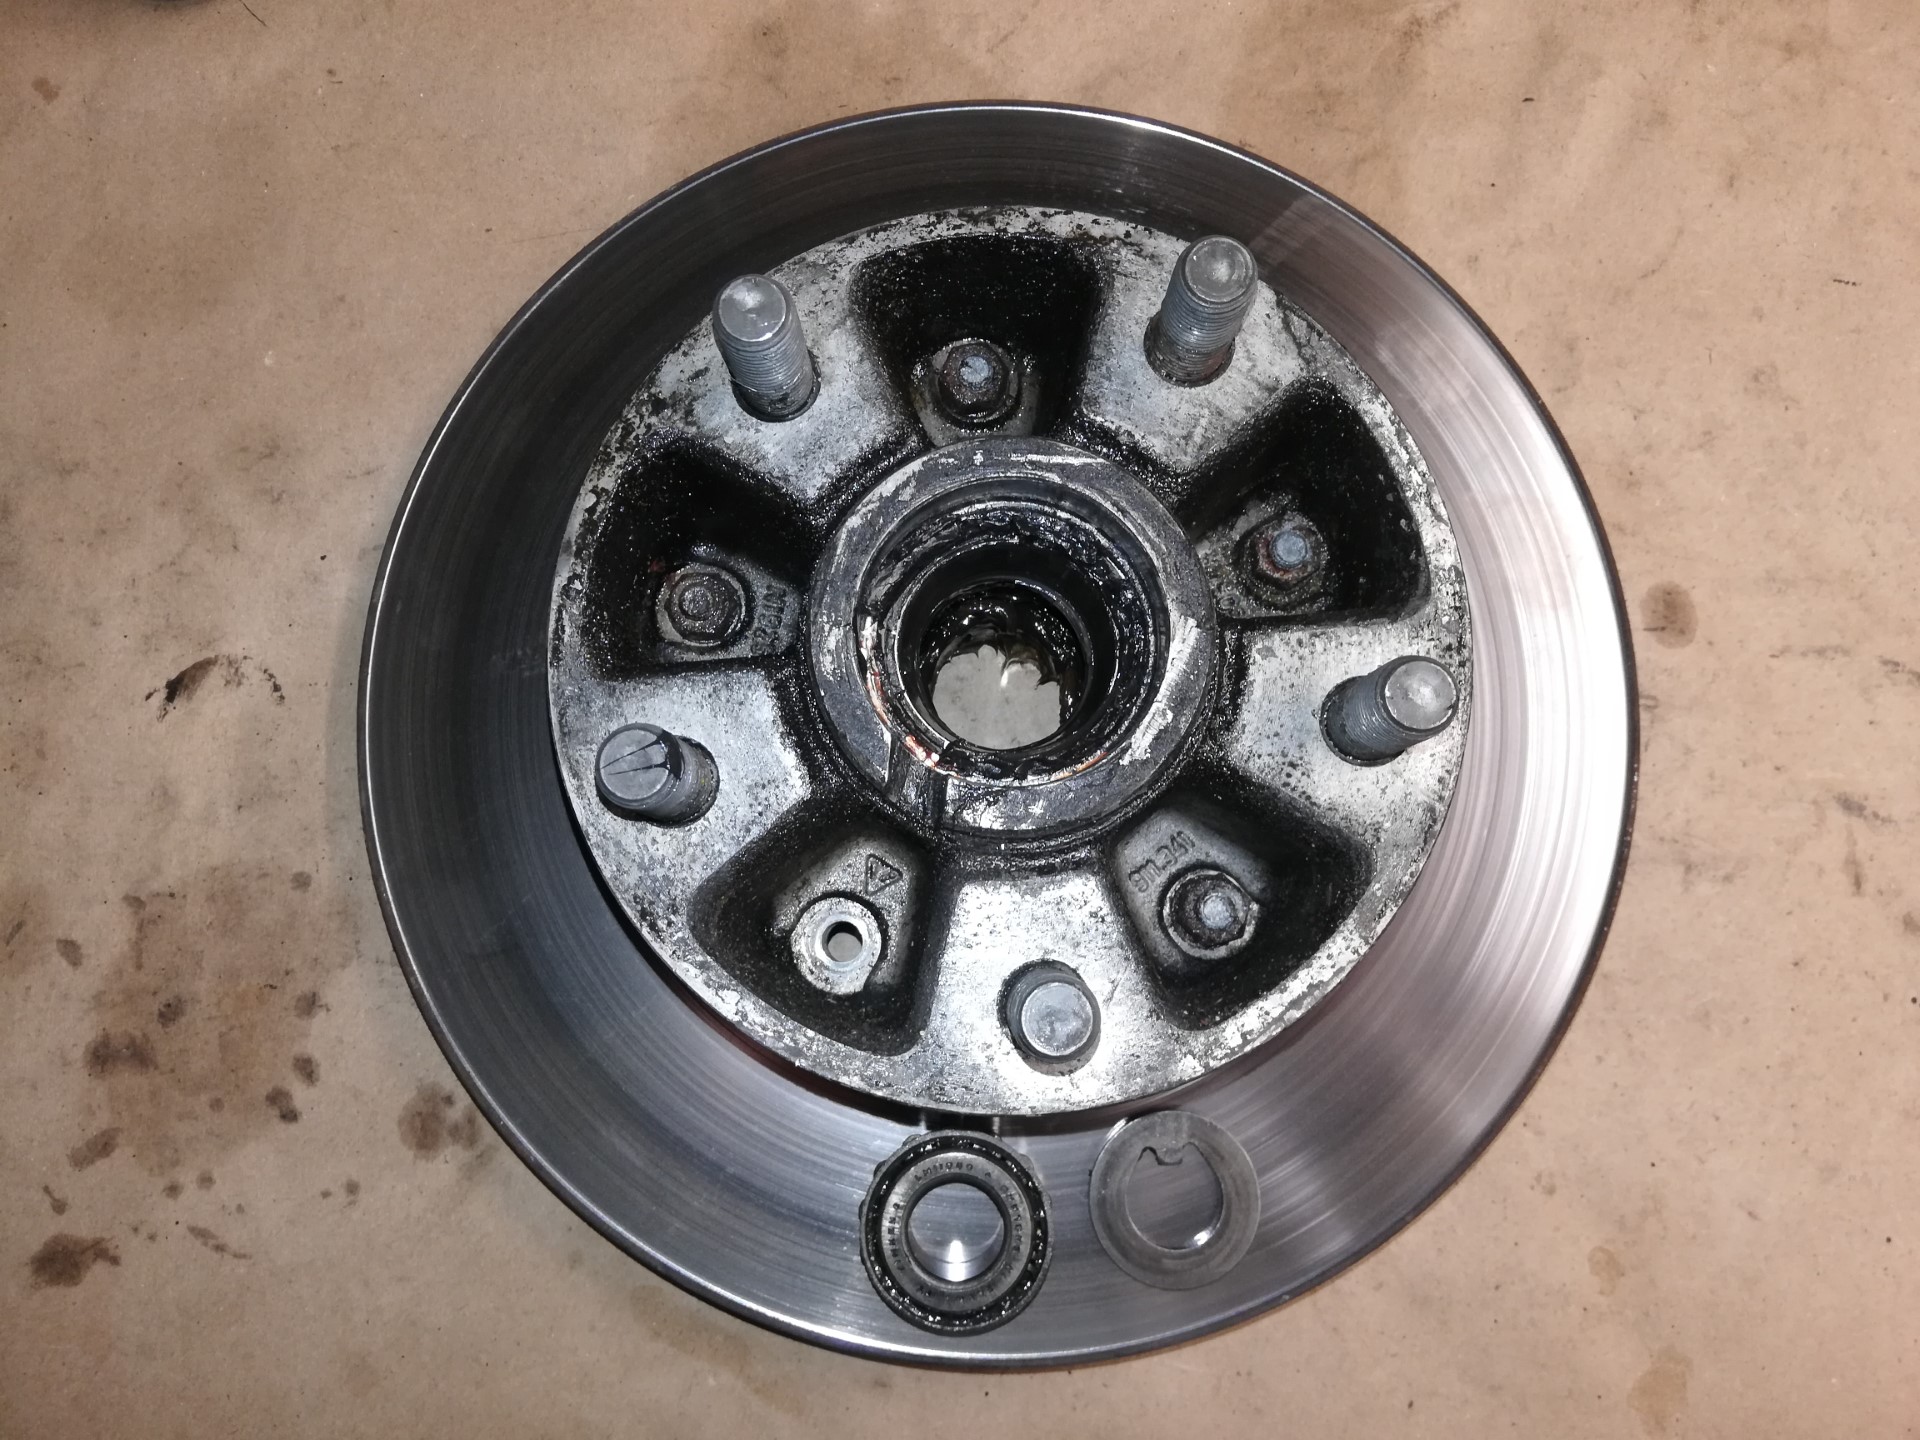 Air-cooled Porsche 911 front wheel hub and brake rotor